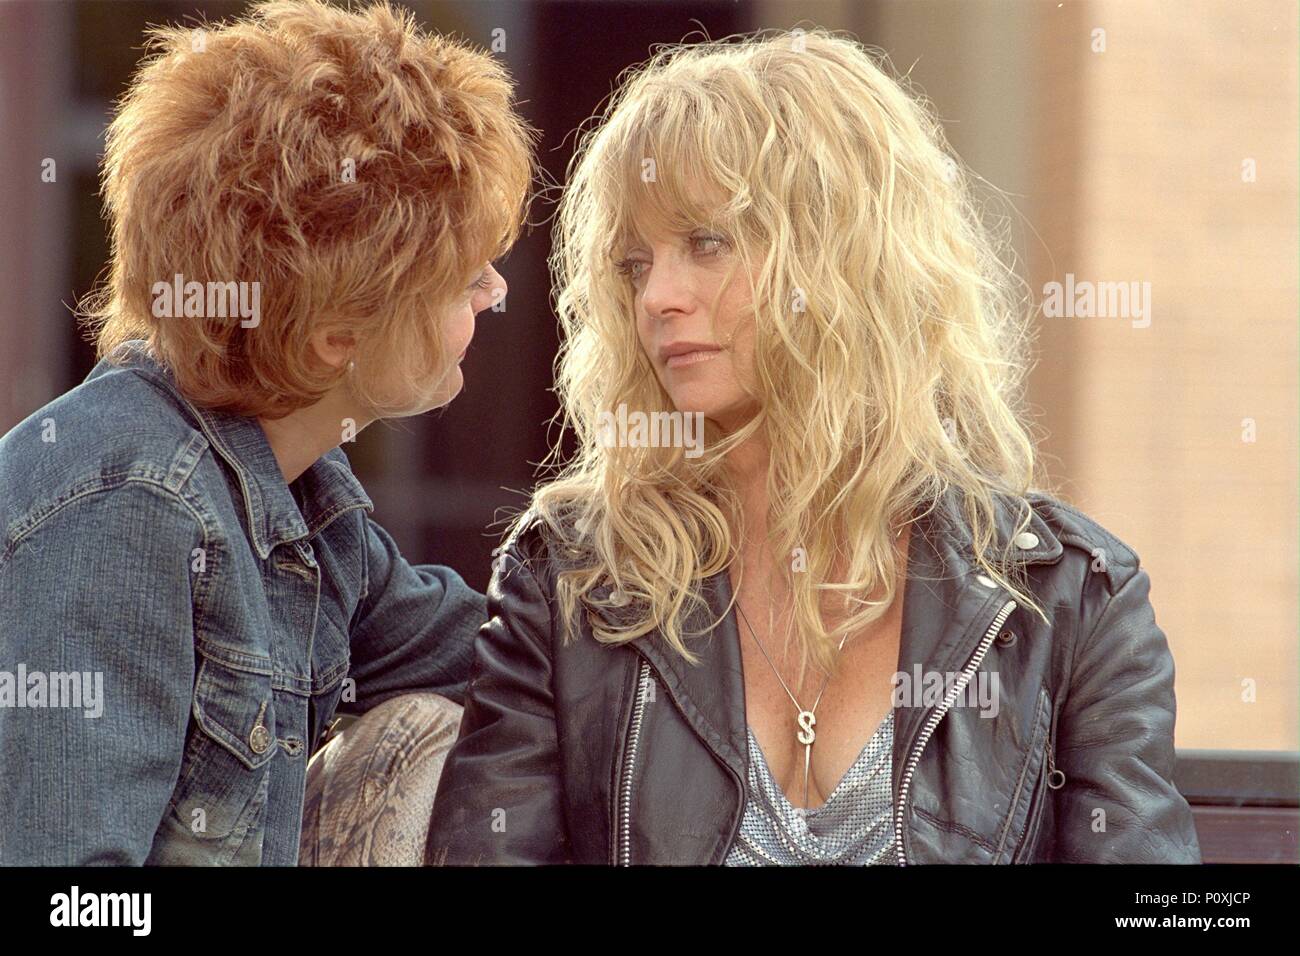 Goldie Hawn Banger Sisters High Resolution Stock Photography and Images -  Alamy